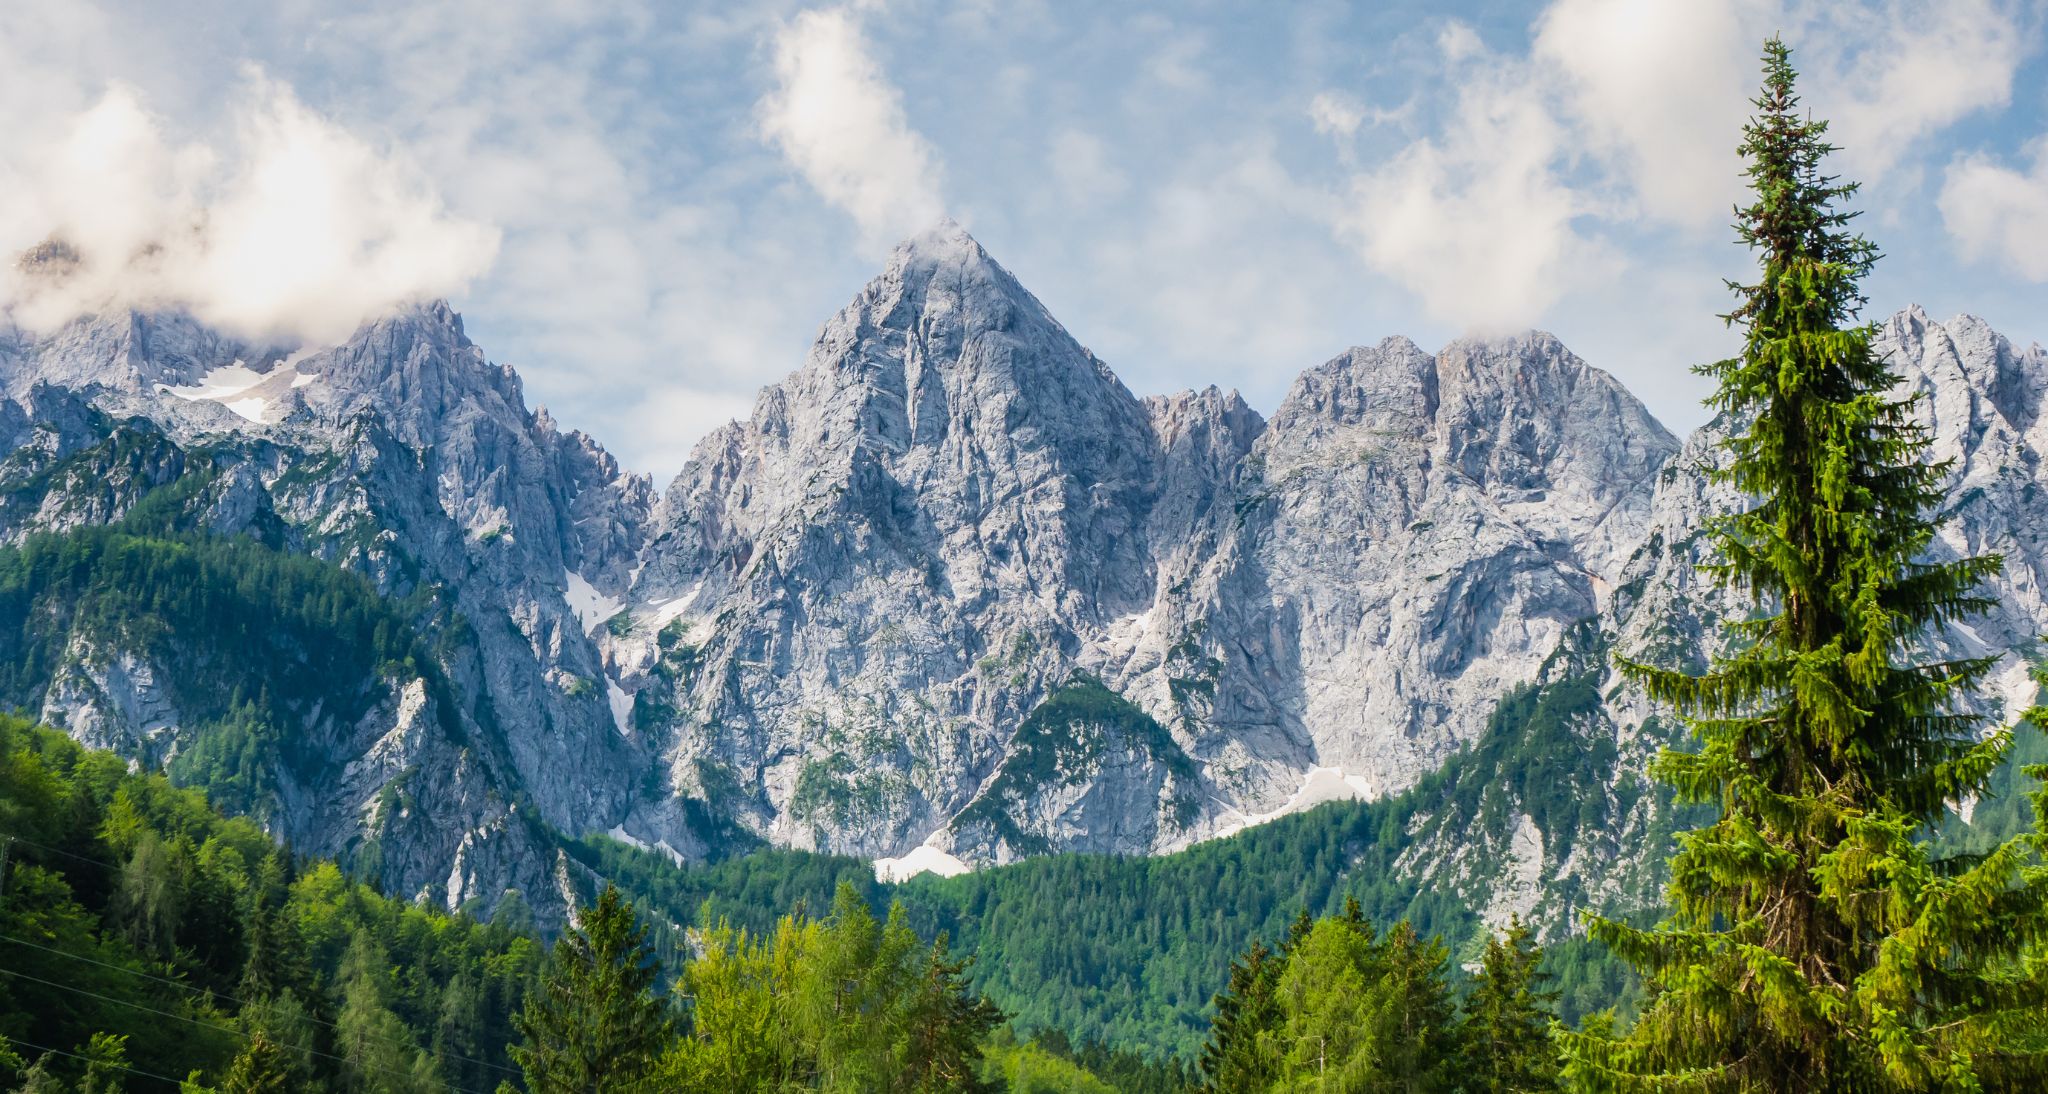 Slovenia boasts a wealth of stunning landscapes including the Julian Alps